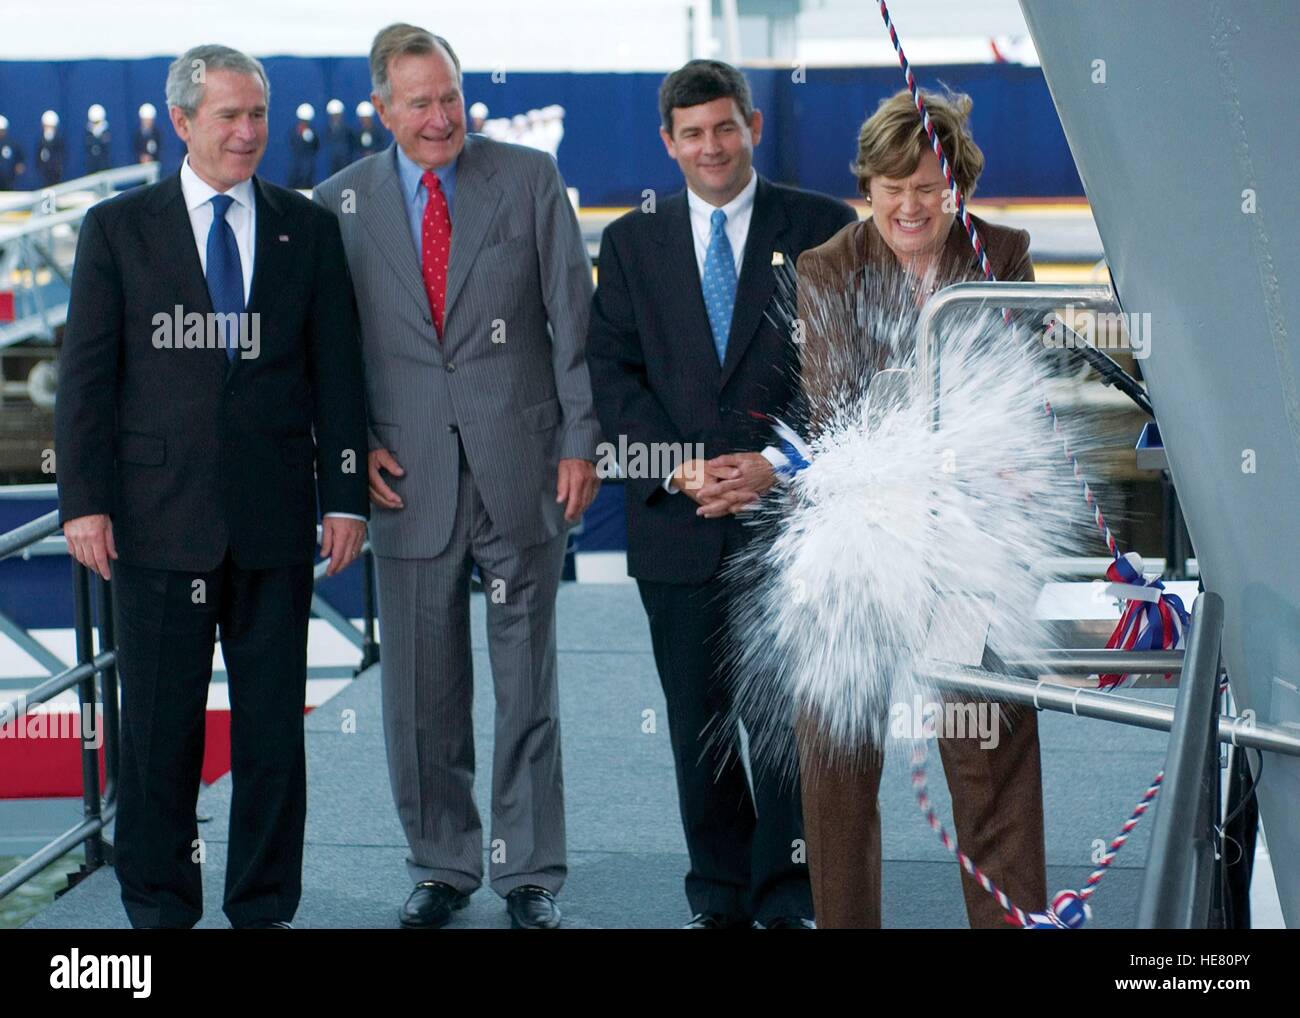 From left to right, U.S. President George W. Bush, former President George H.W. Bush, Northrop Grumman Newport News President Mike Petters, and ship sponsor Dorothy Bush Koch christen the USN Nimitz-class aircraft carrier USS George H.W. Bush at the Northrop Grumman Newport News Shipyard October 7, 2006 in Newport News, Virginia. Stock Photo